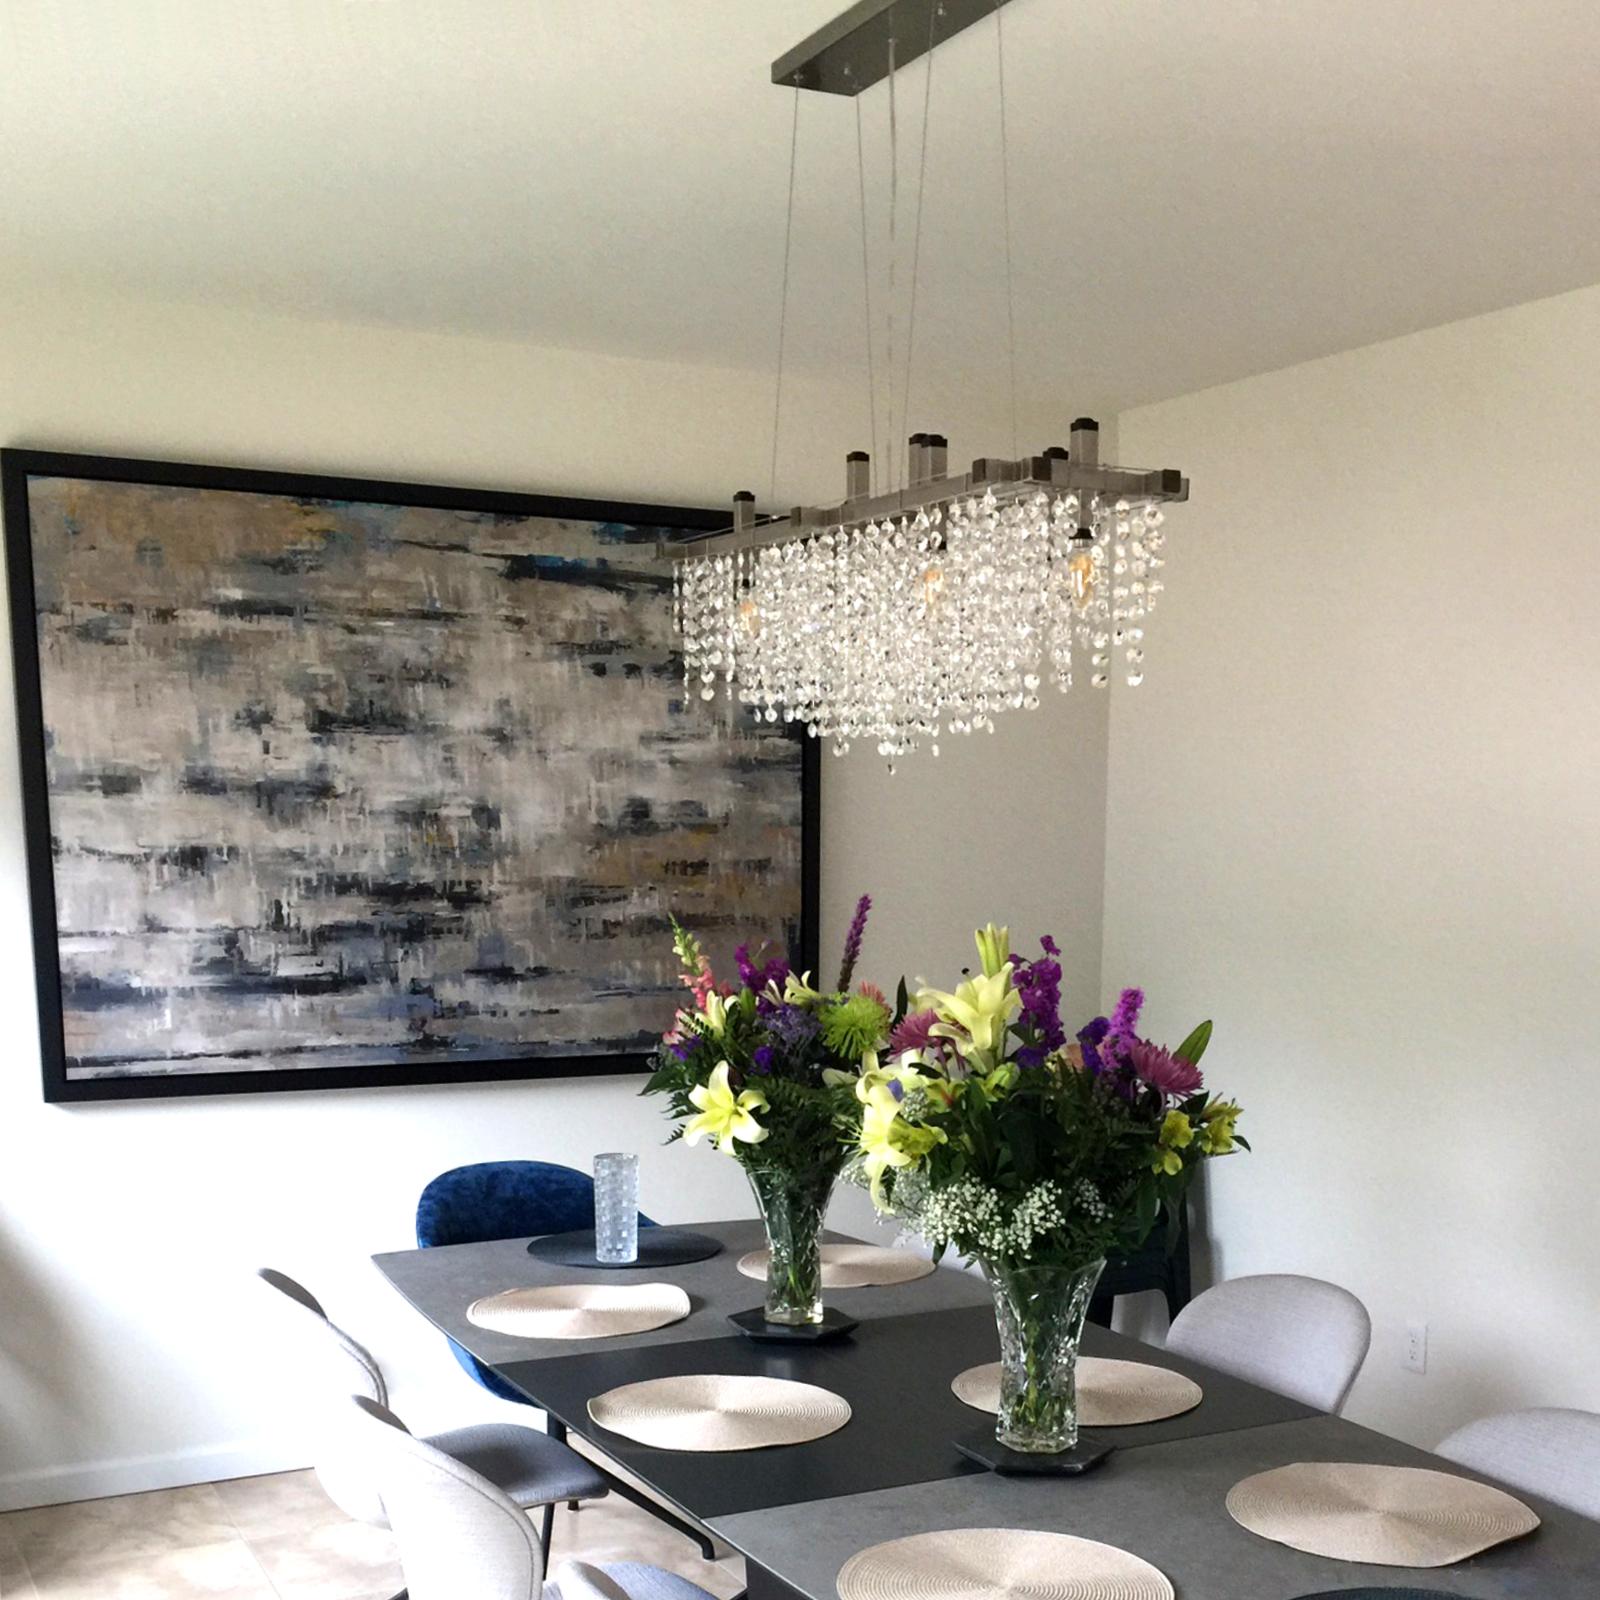 The matrix crystal linear suspension chandelier is a figurative shower of light, refraction, and highly-polished crystal. Random chains of high-quality crystal octagons and squares hang from a taut steel cable grid to create the appearance of